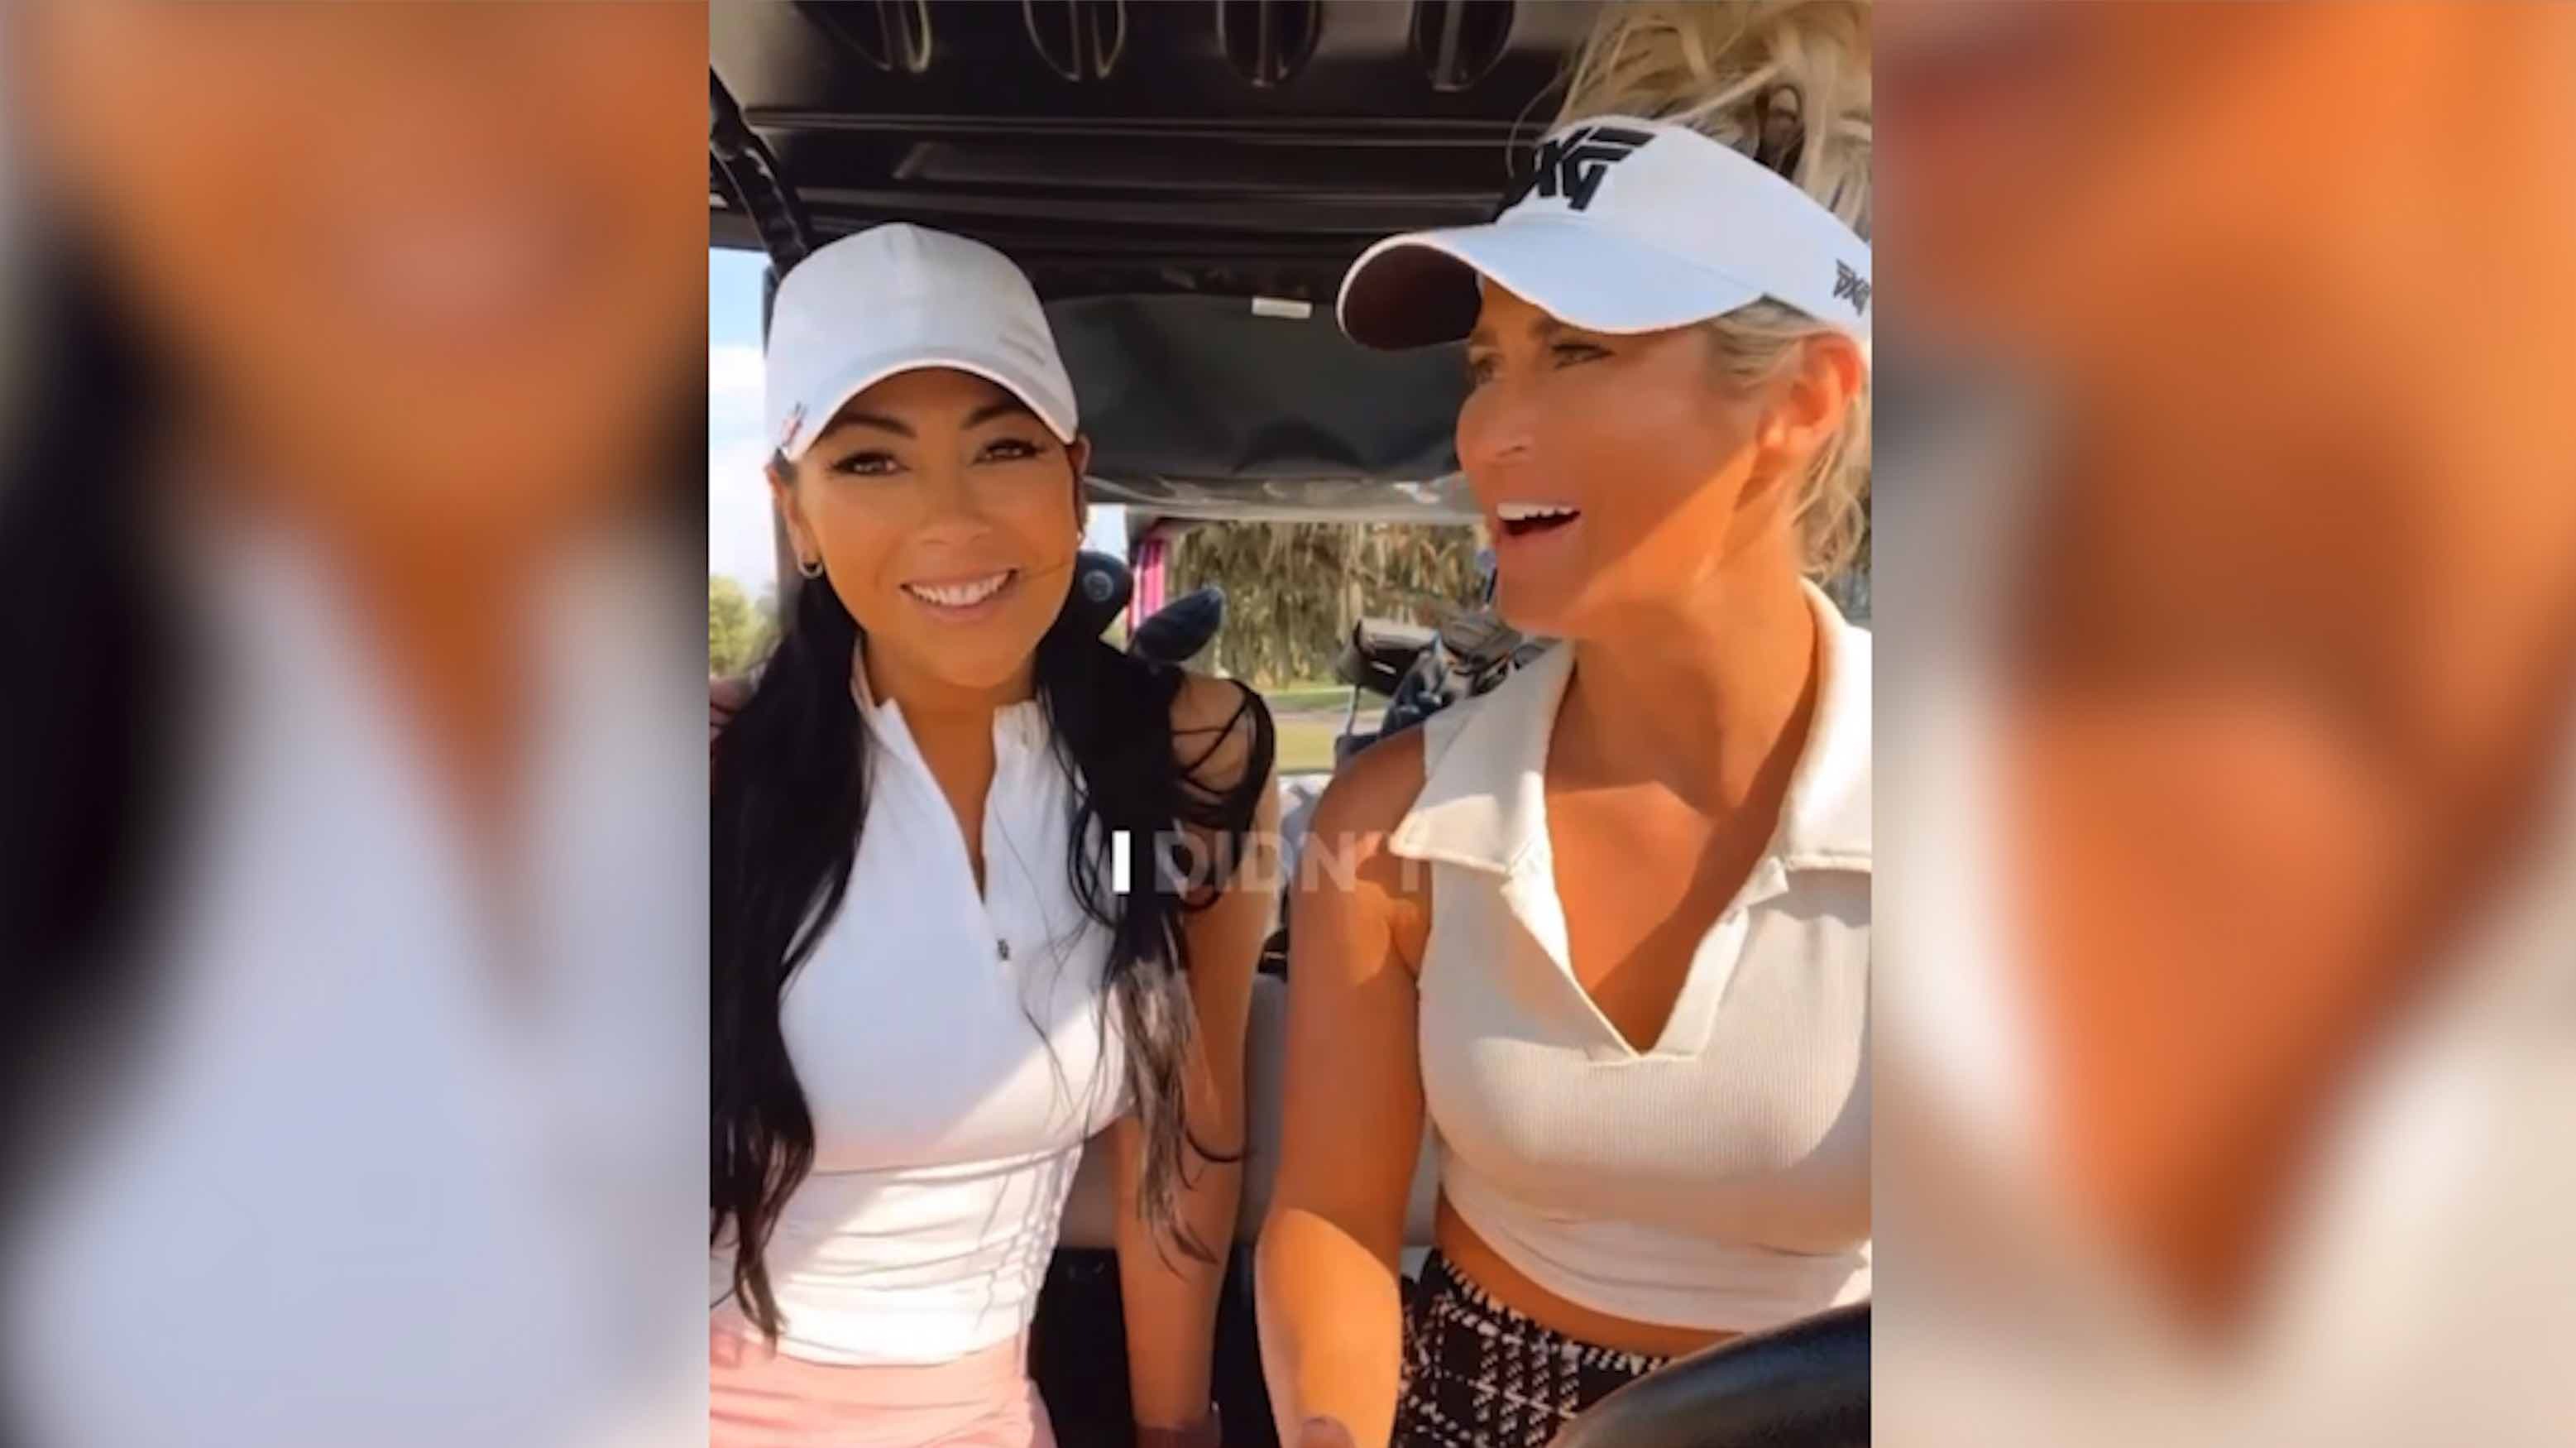 Paige Spiranac checks her boob-tan at the golf course in a low-cut dress  making heads turn